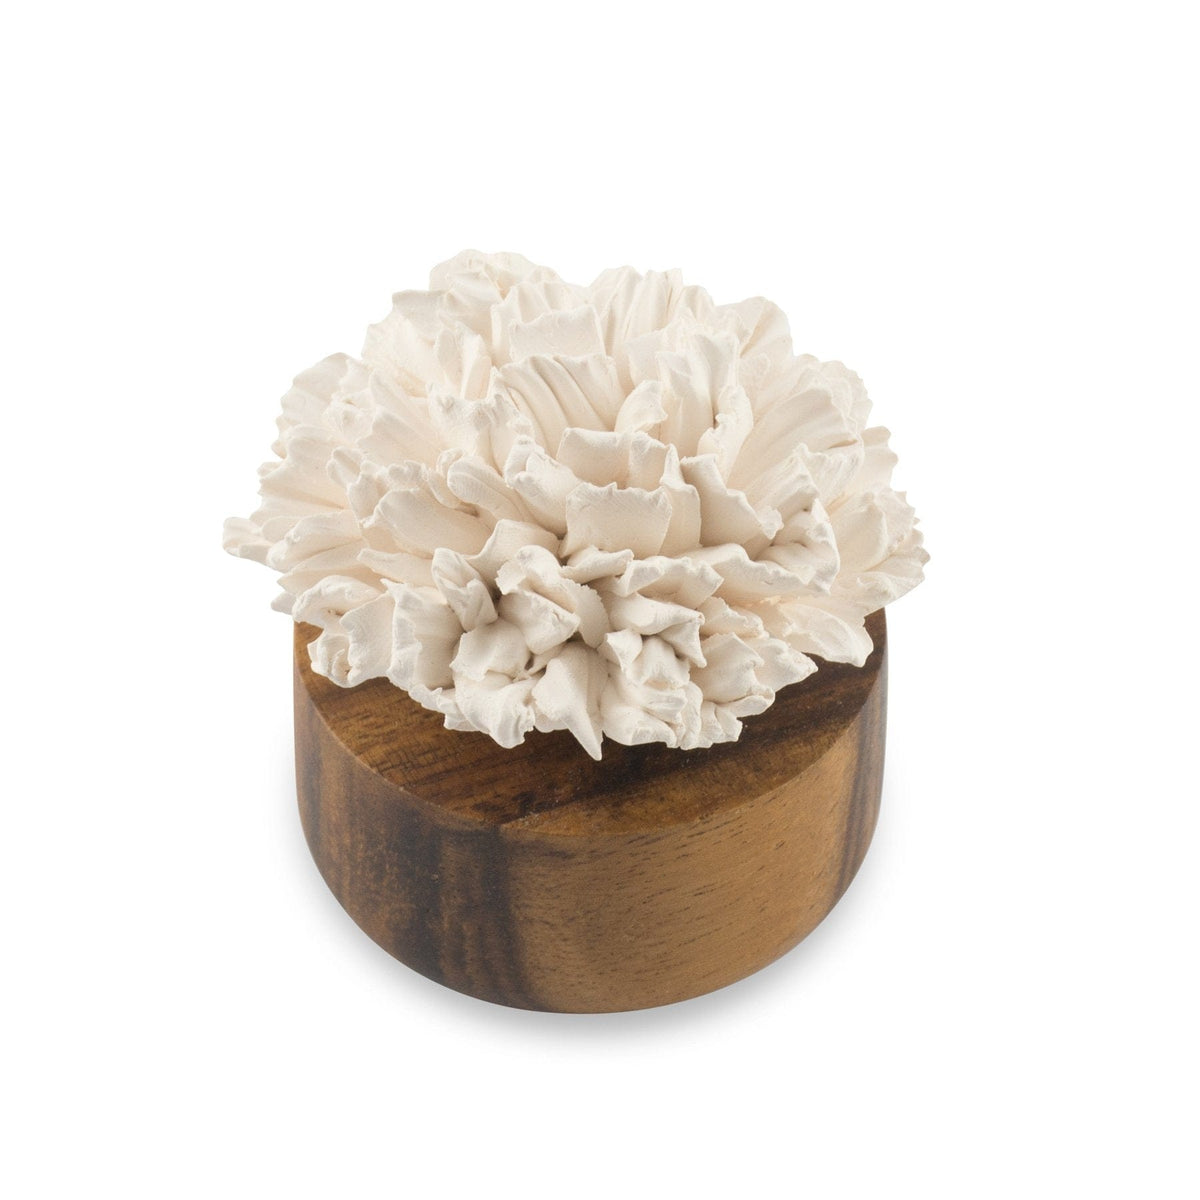 Hysses Home Scents Flower Refreshment Scenting Clay Carnation